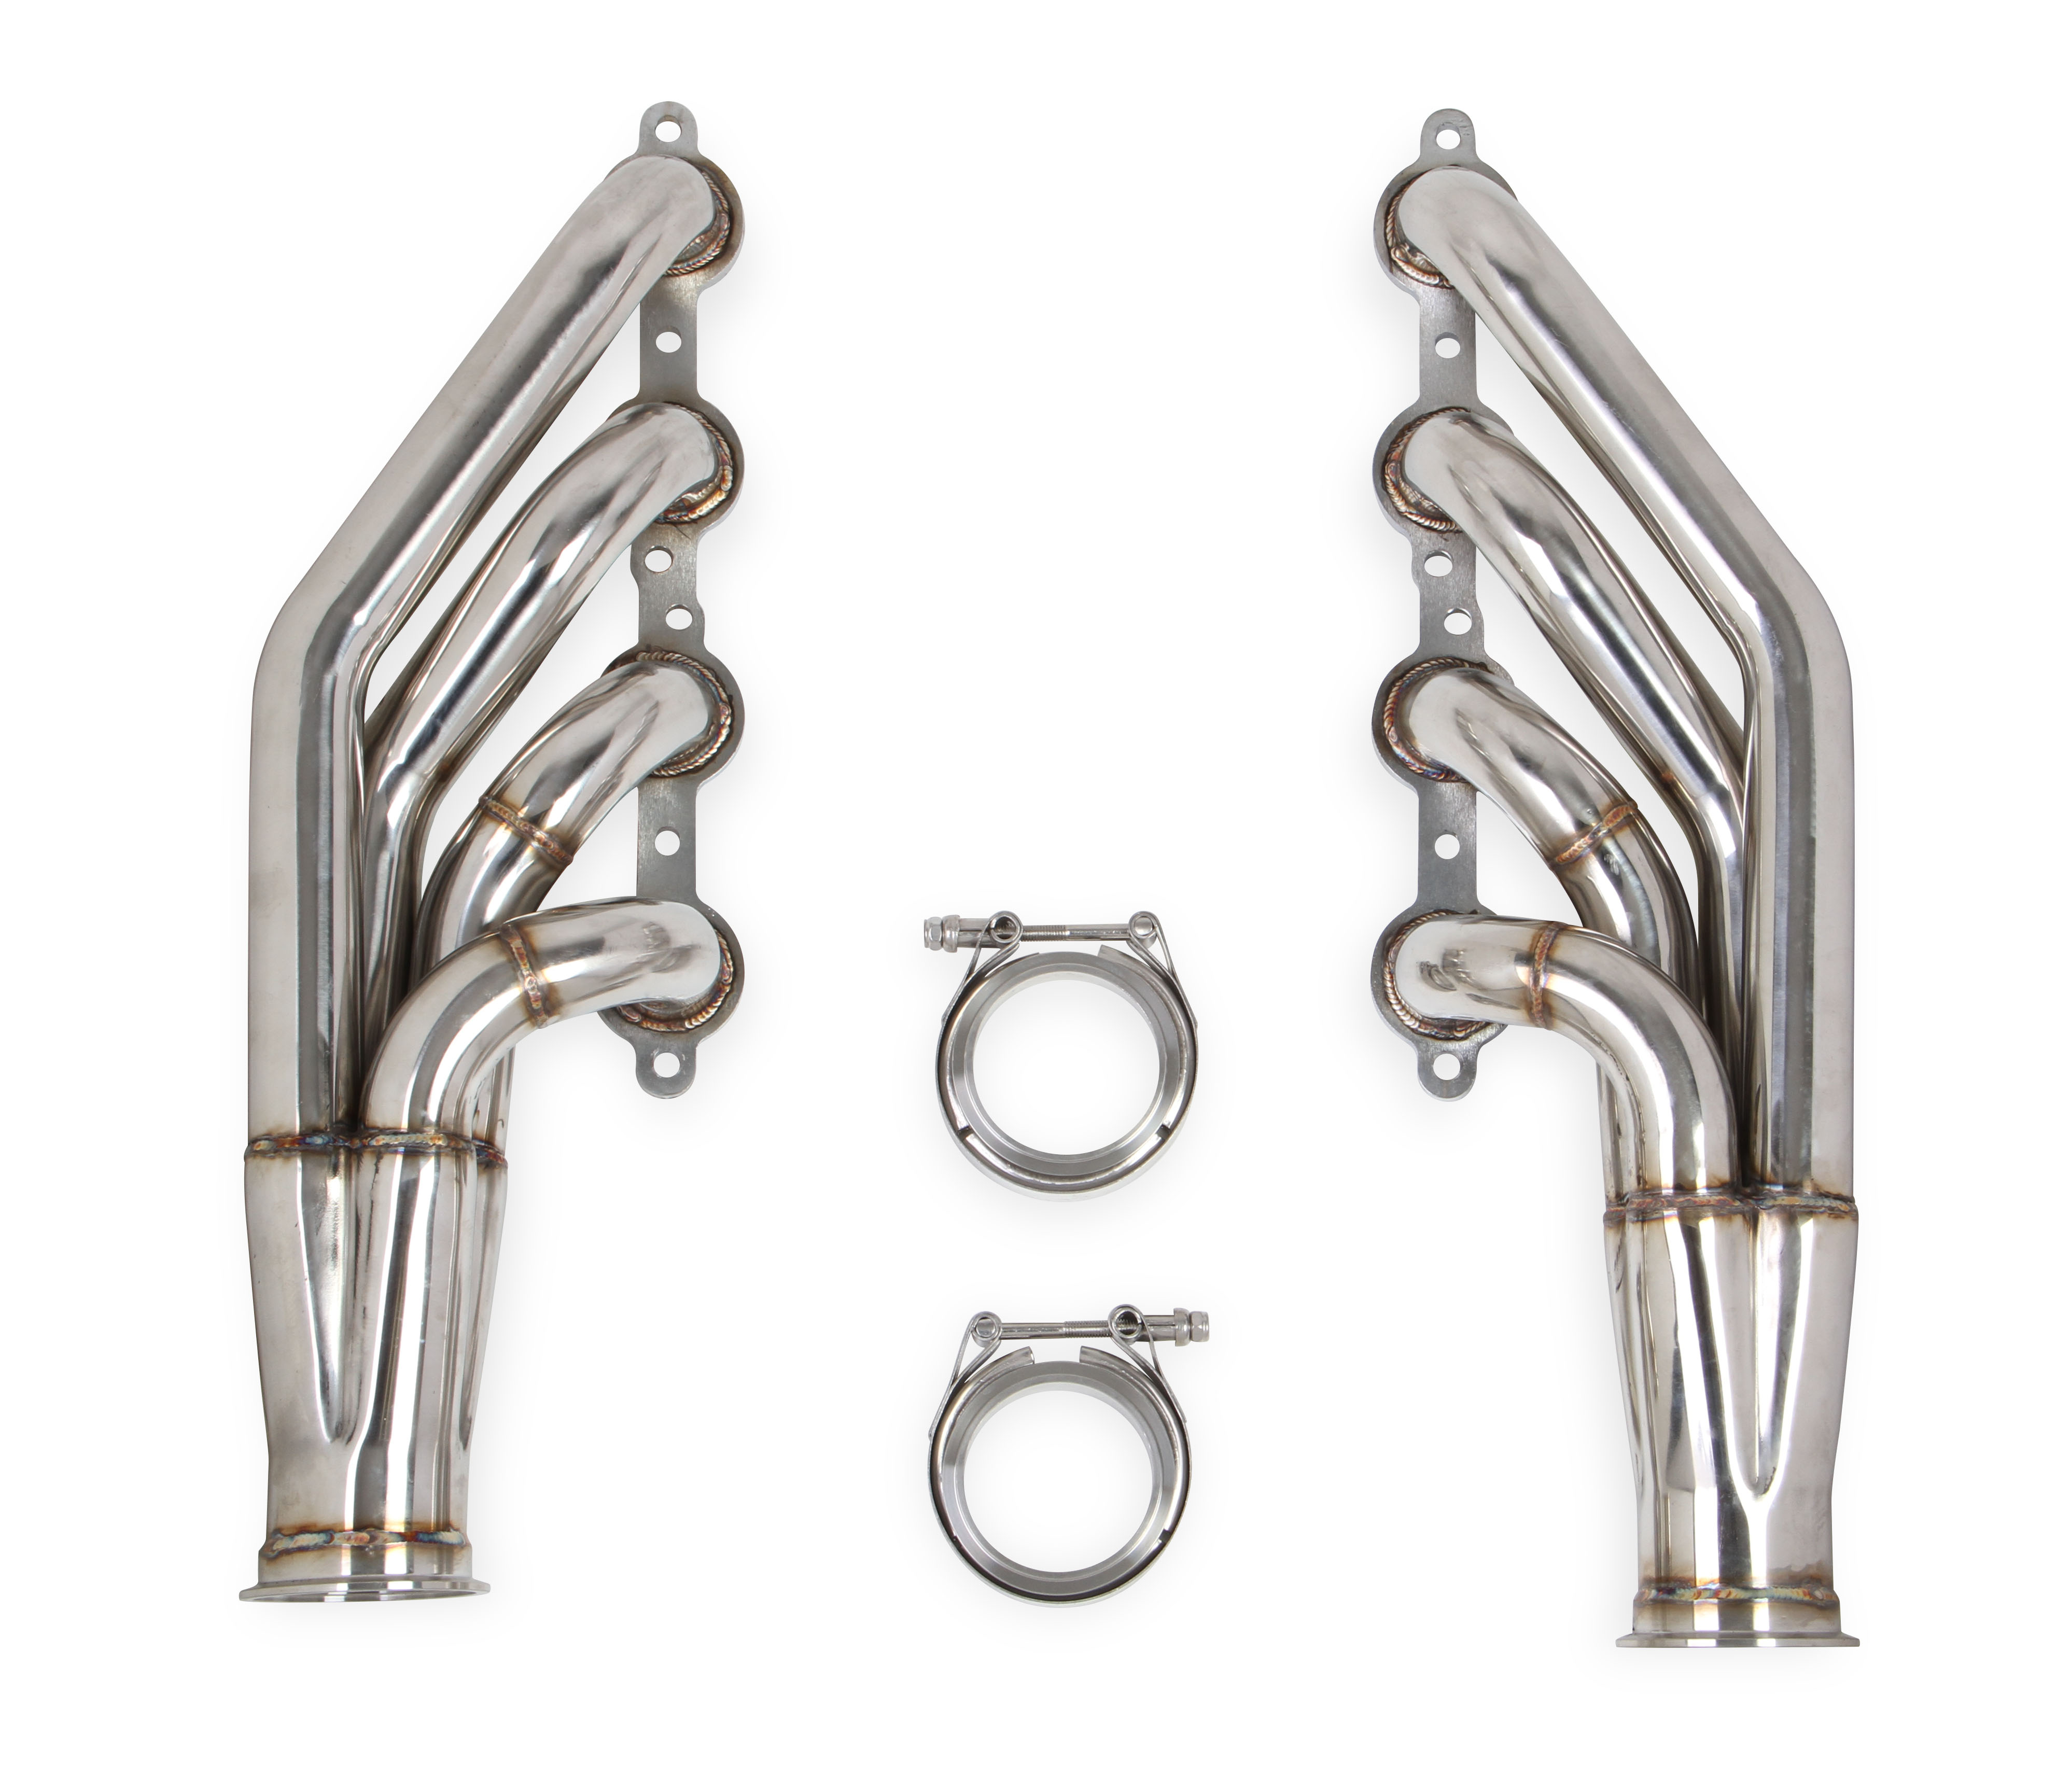 Flowtech LS 4.8L/5.3L/6.0L V8 1 3/4" 409 Stainless Turbo Headers - Ceramic Coated